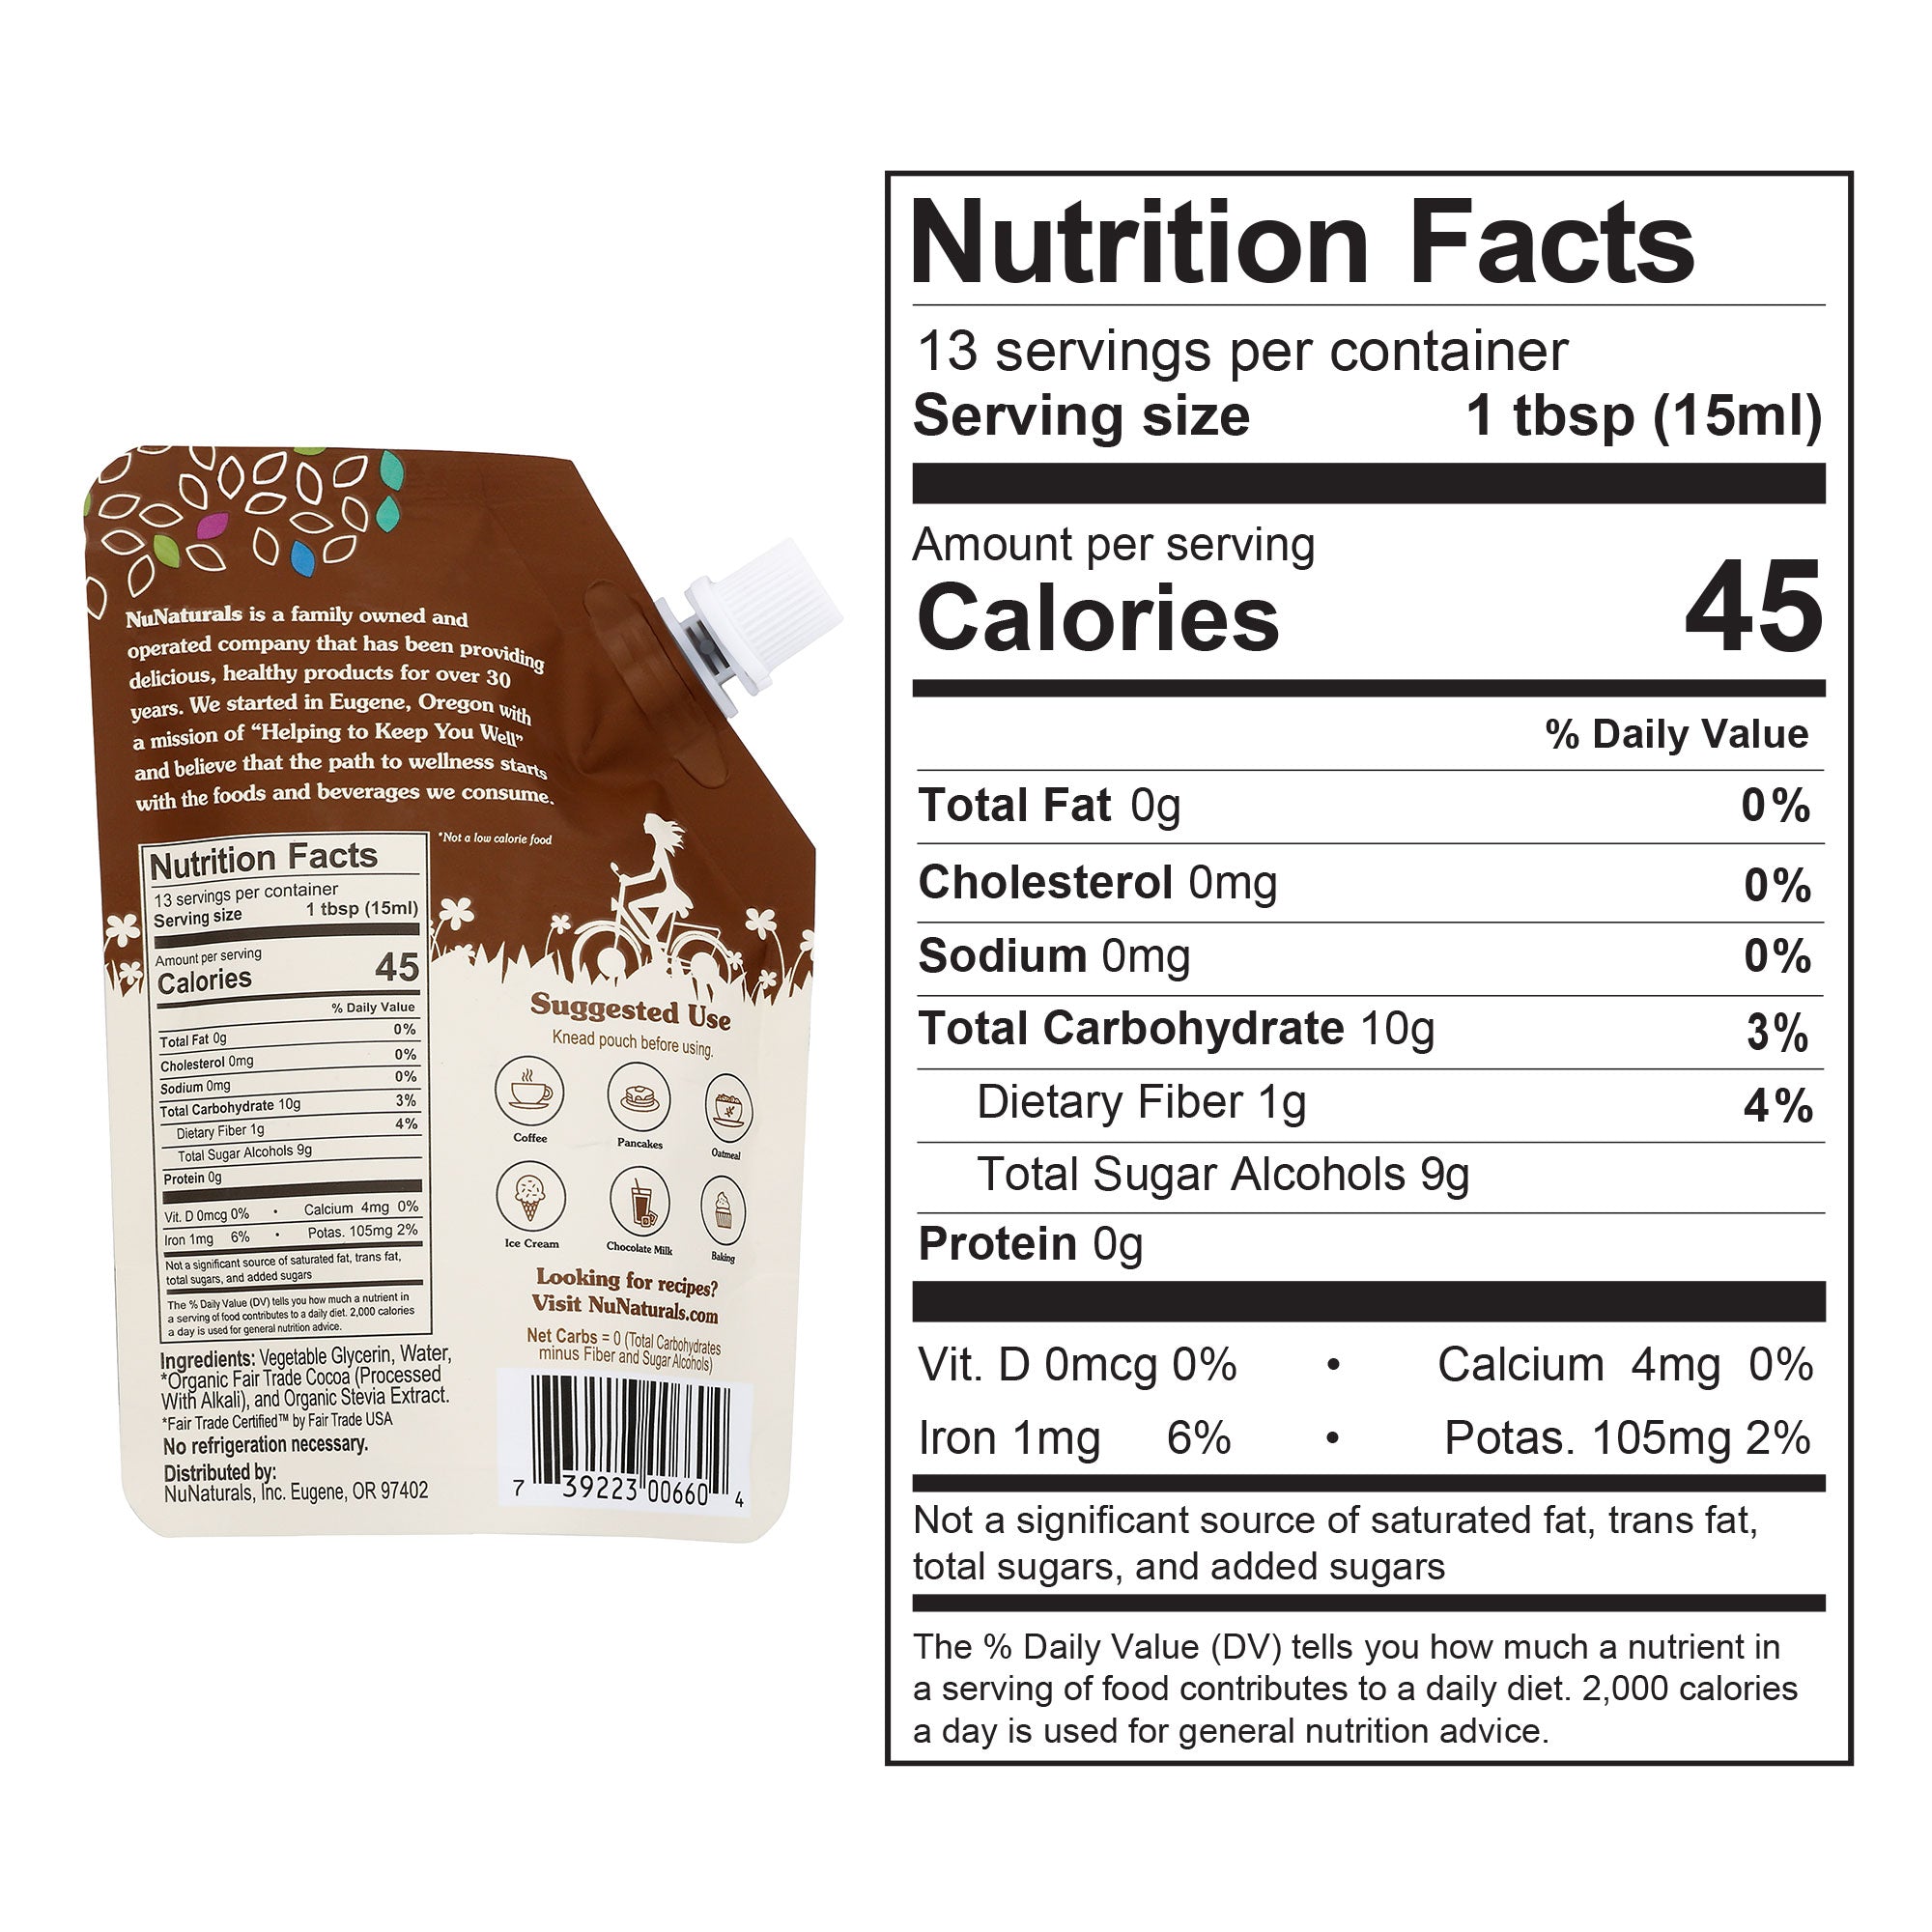 NuNaturals Stevia Chocolate Syrup Nutrition Facts